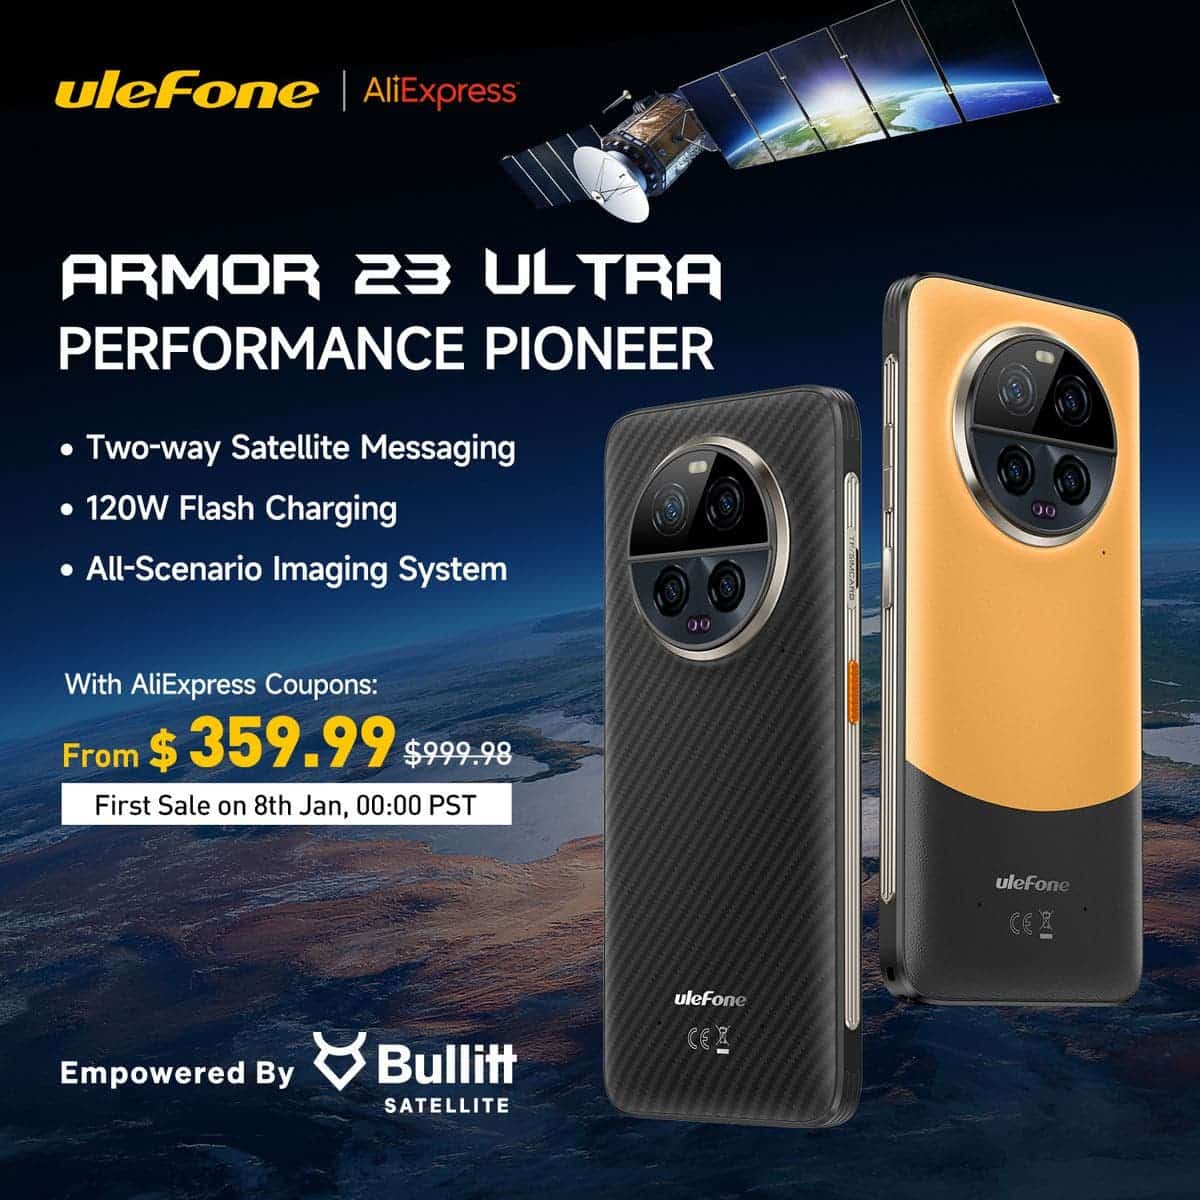 Ulefone Armor 23 Ultra launched with titanium frame, satellite